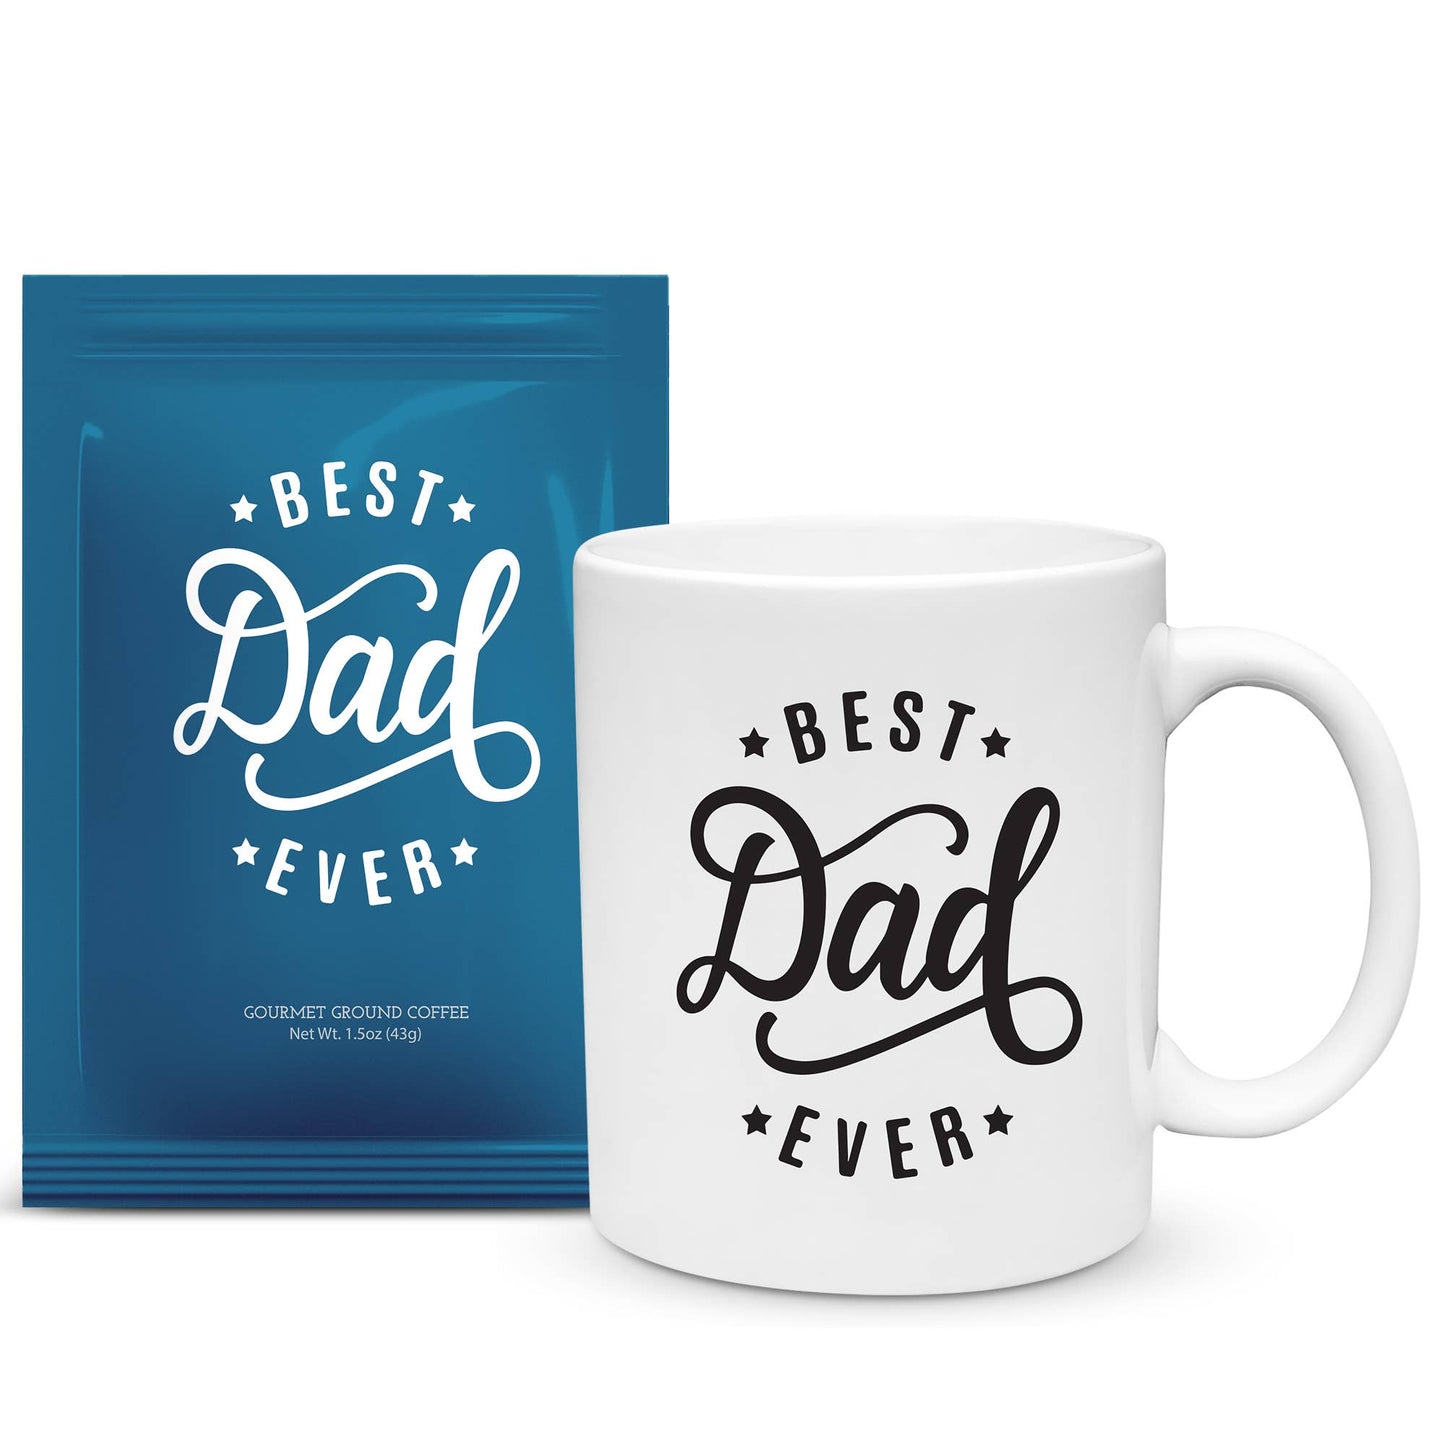 Swag Brewery - Best Dad Ever Mug and Ground Coffee Gift Set